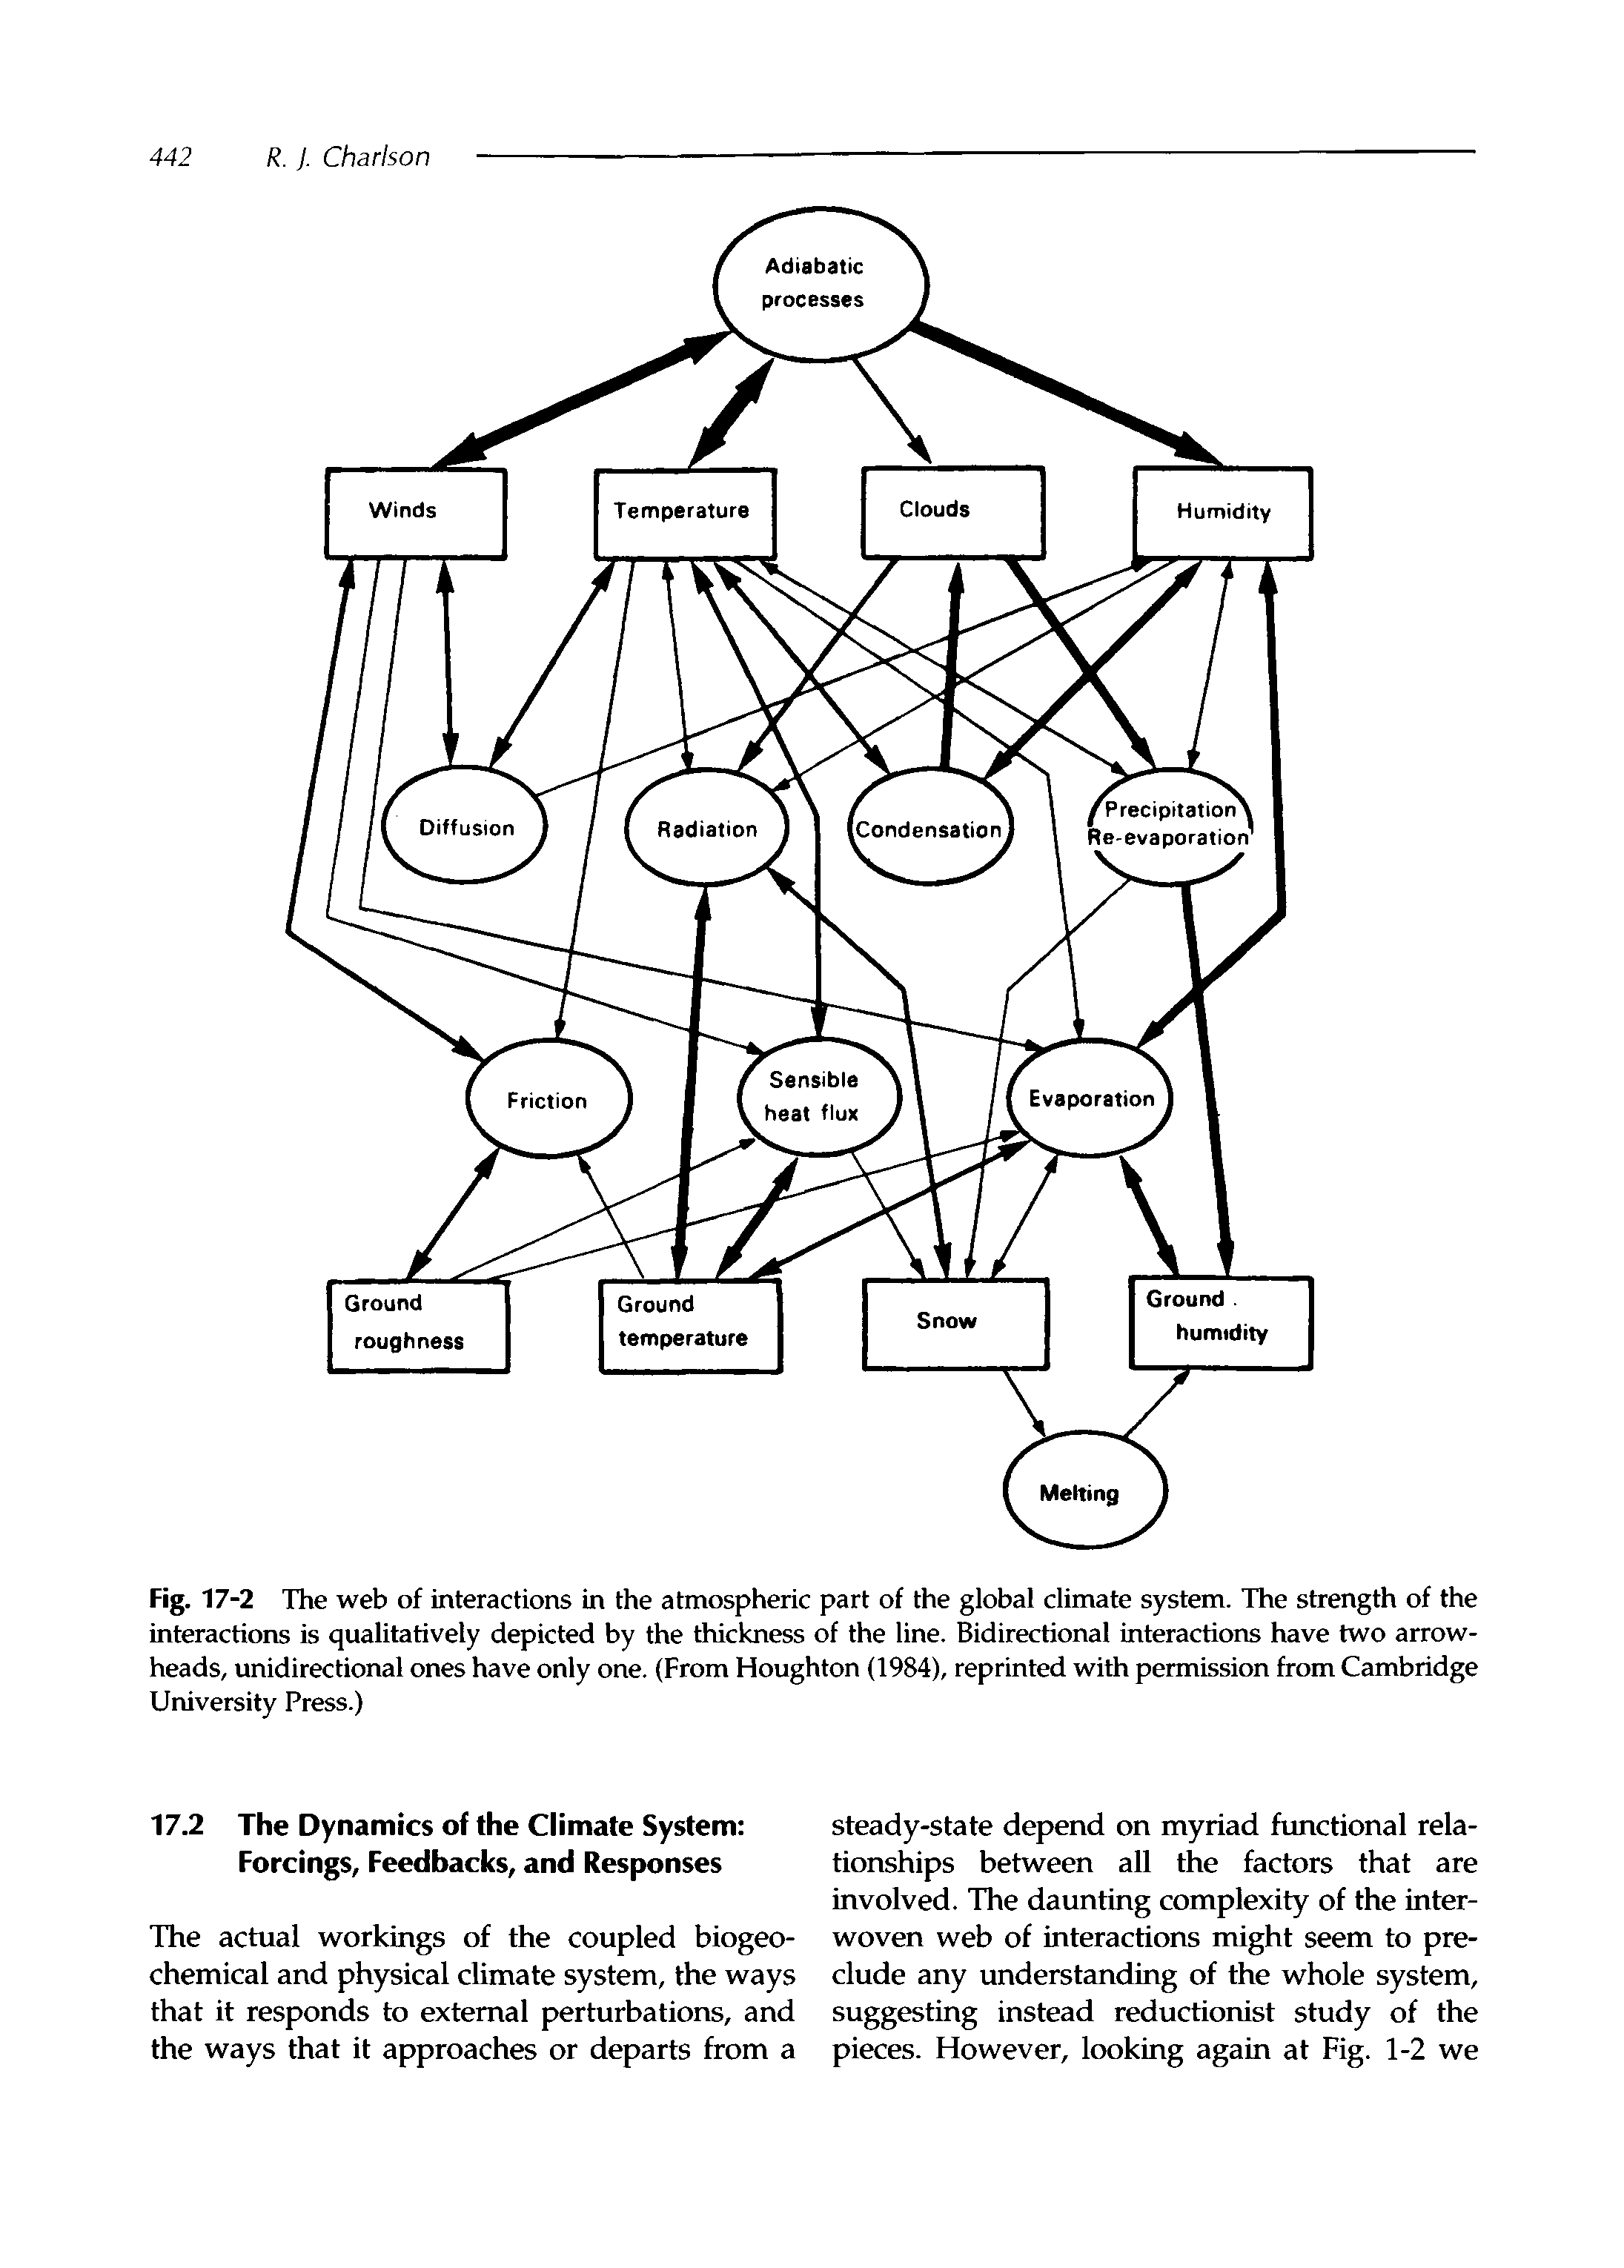 Fig. 17-2 The web of interactions in the atmospheric part of the global climate system. The strength of the interactions is qualitatively depicted by the thickness of the line. Bidirectional interactions have two arrowheads, unidirectional ones have only one. (From Houghton (1984), reprinted with permission from Cambridge University Press.)...